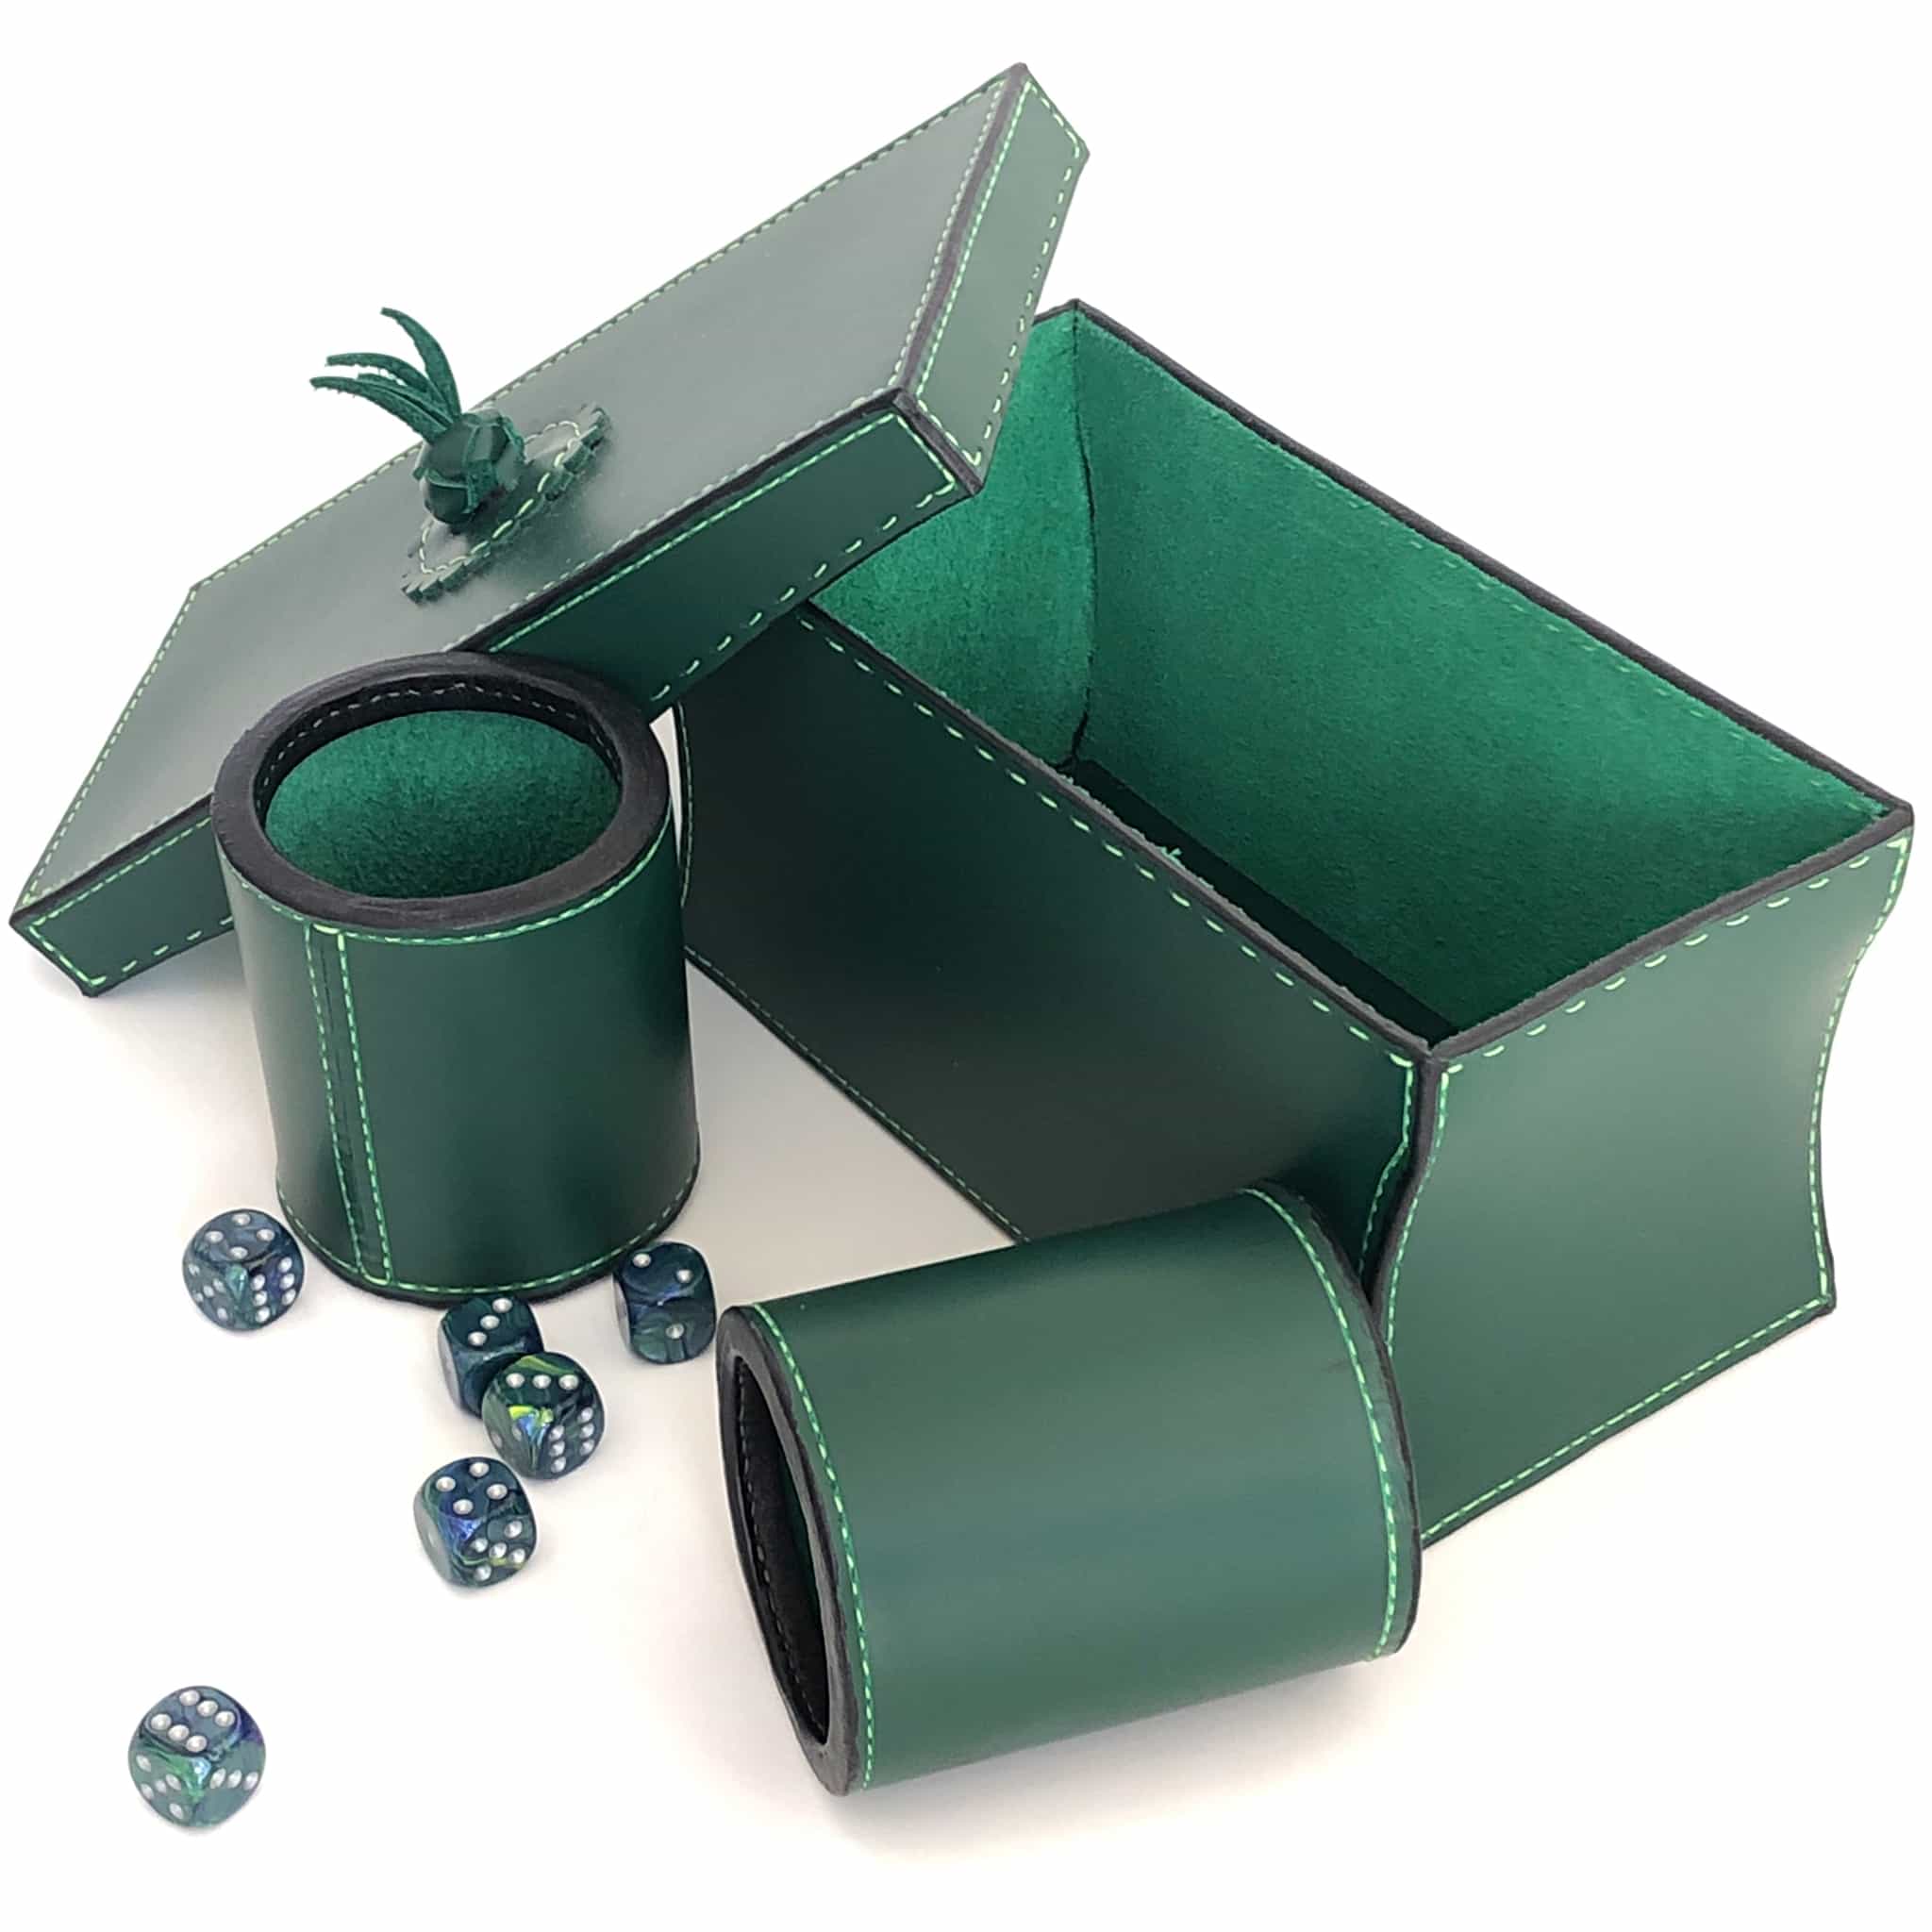 Dice cups and game box in forrest green with dice open